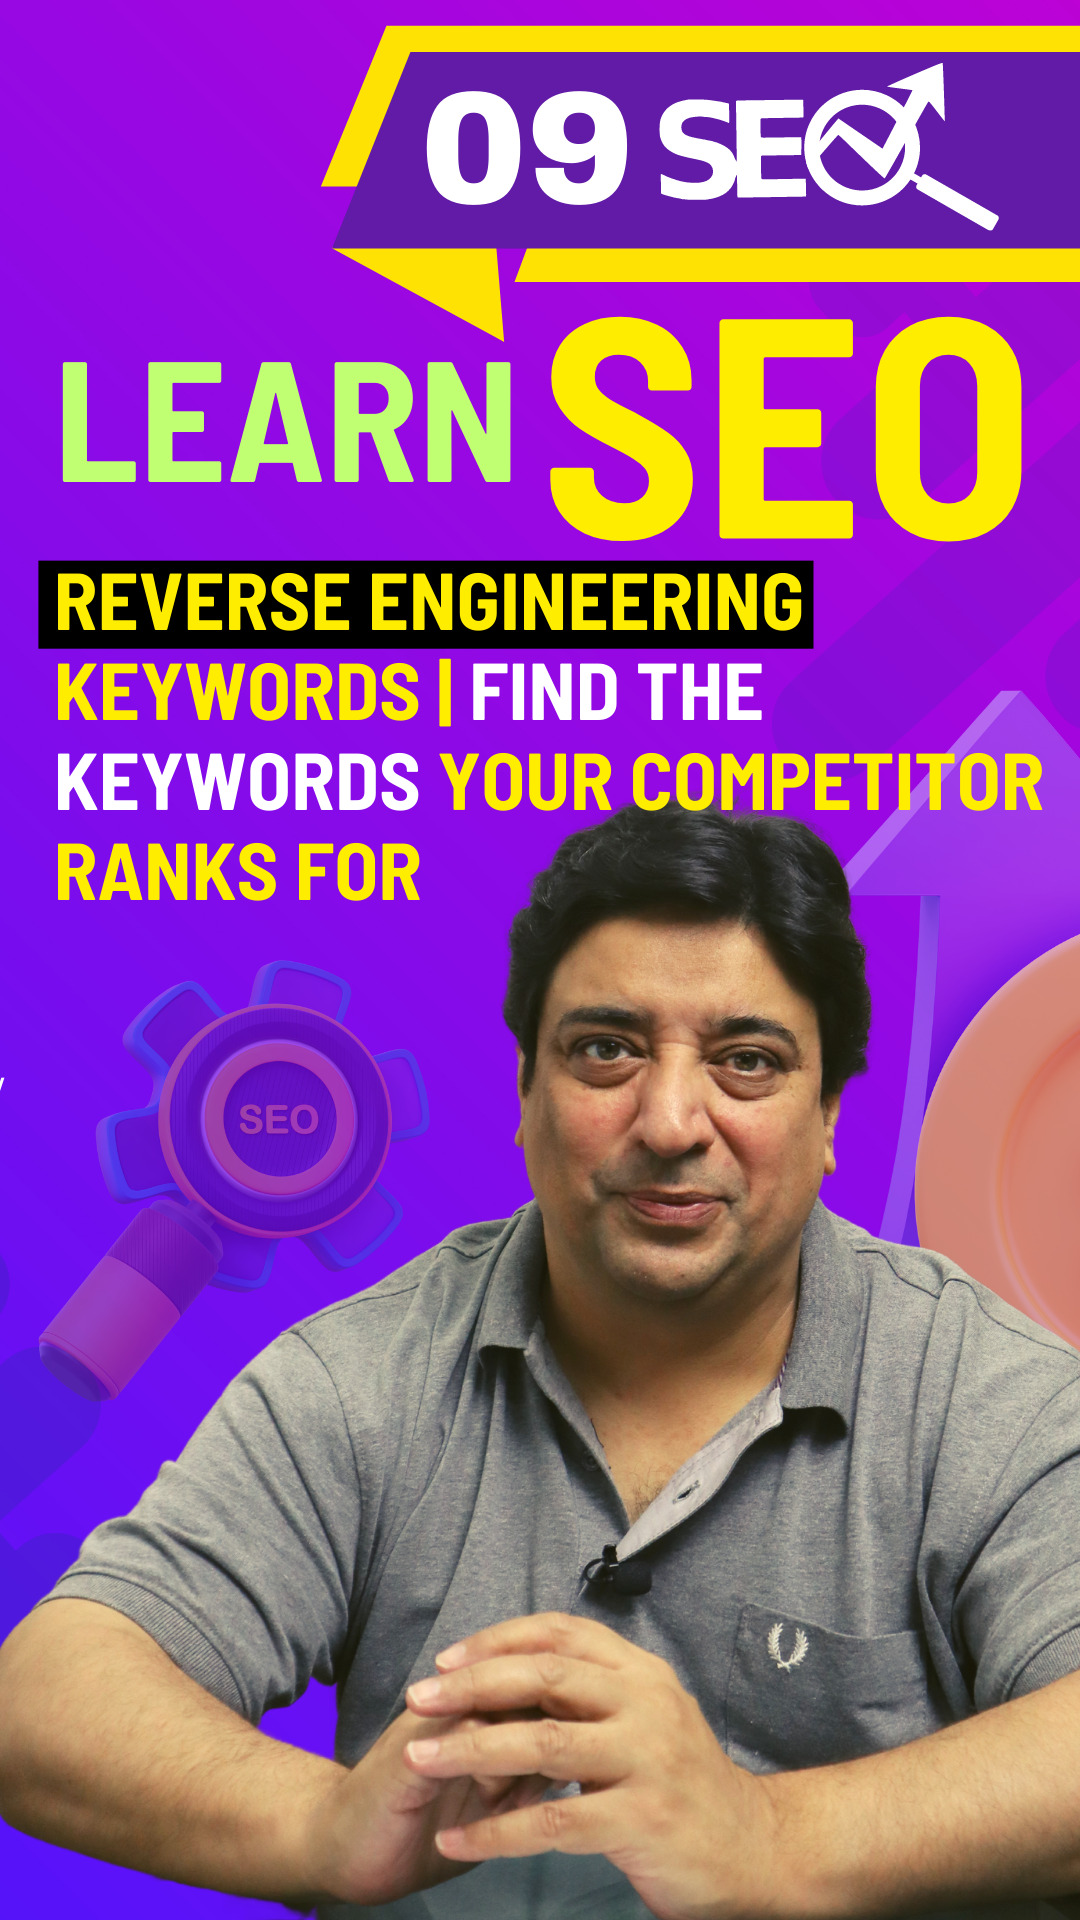 Reverse Engineering Keywords Find the keywords your competitor ranks for